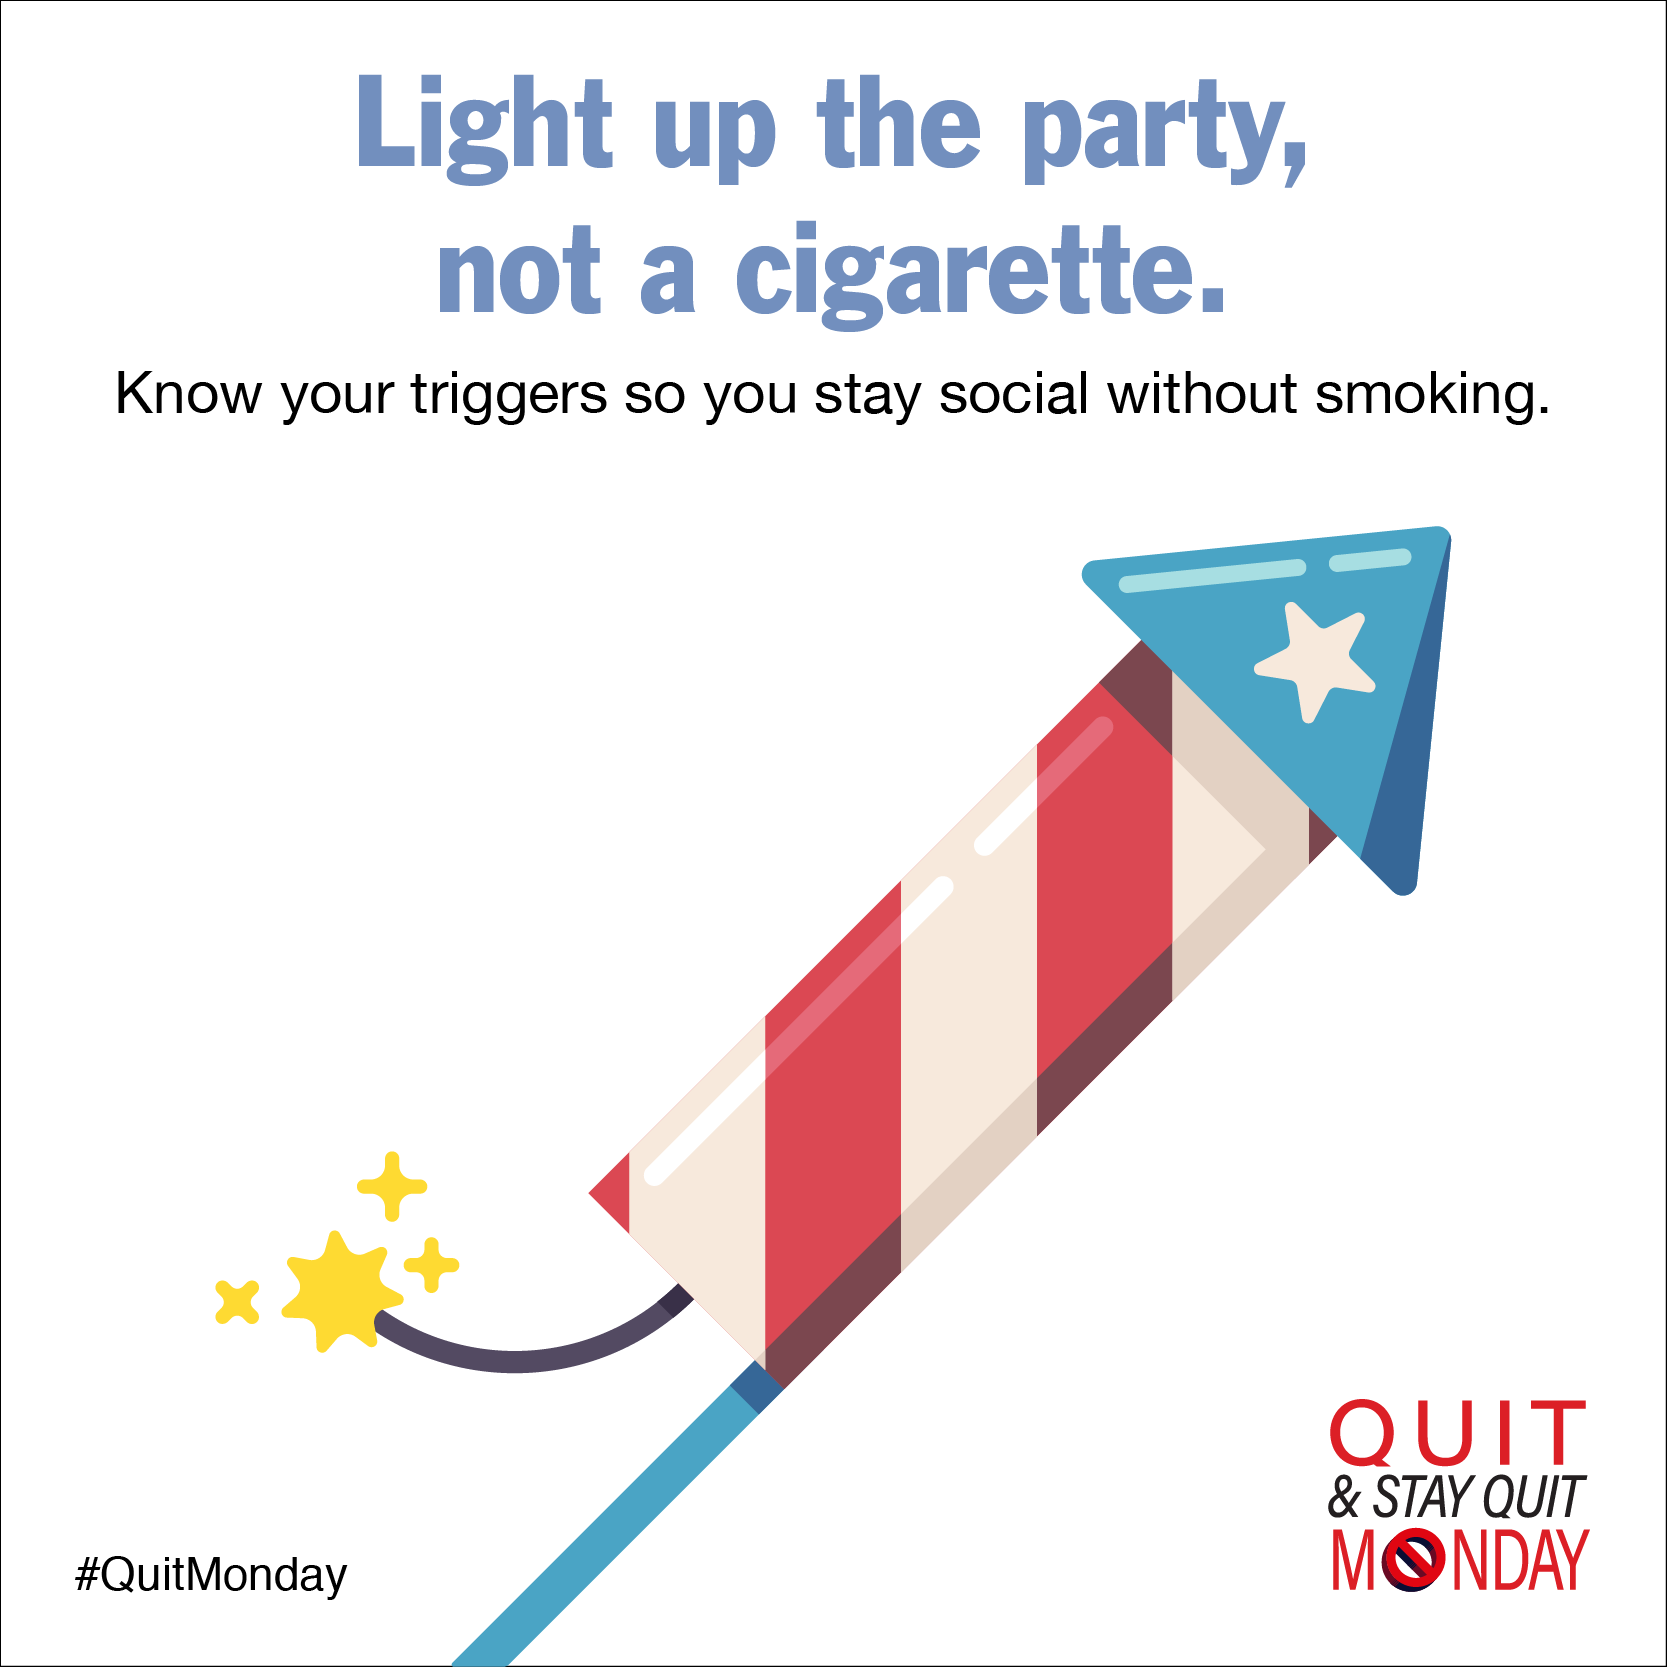 Light up the party, not a cigarette. Know your triggers so you stay social without smoking.